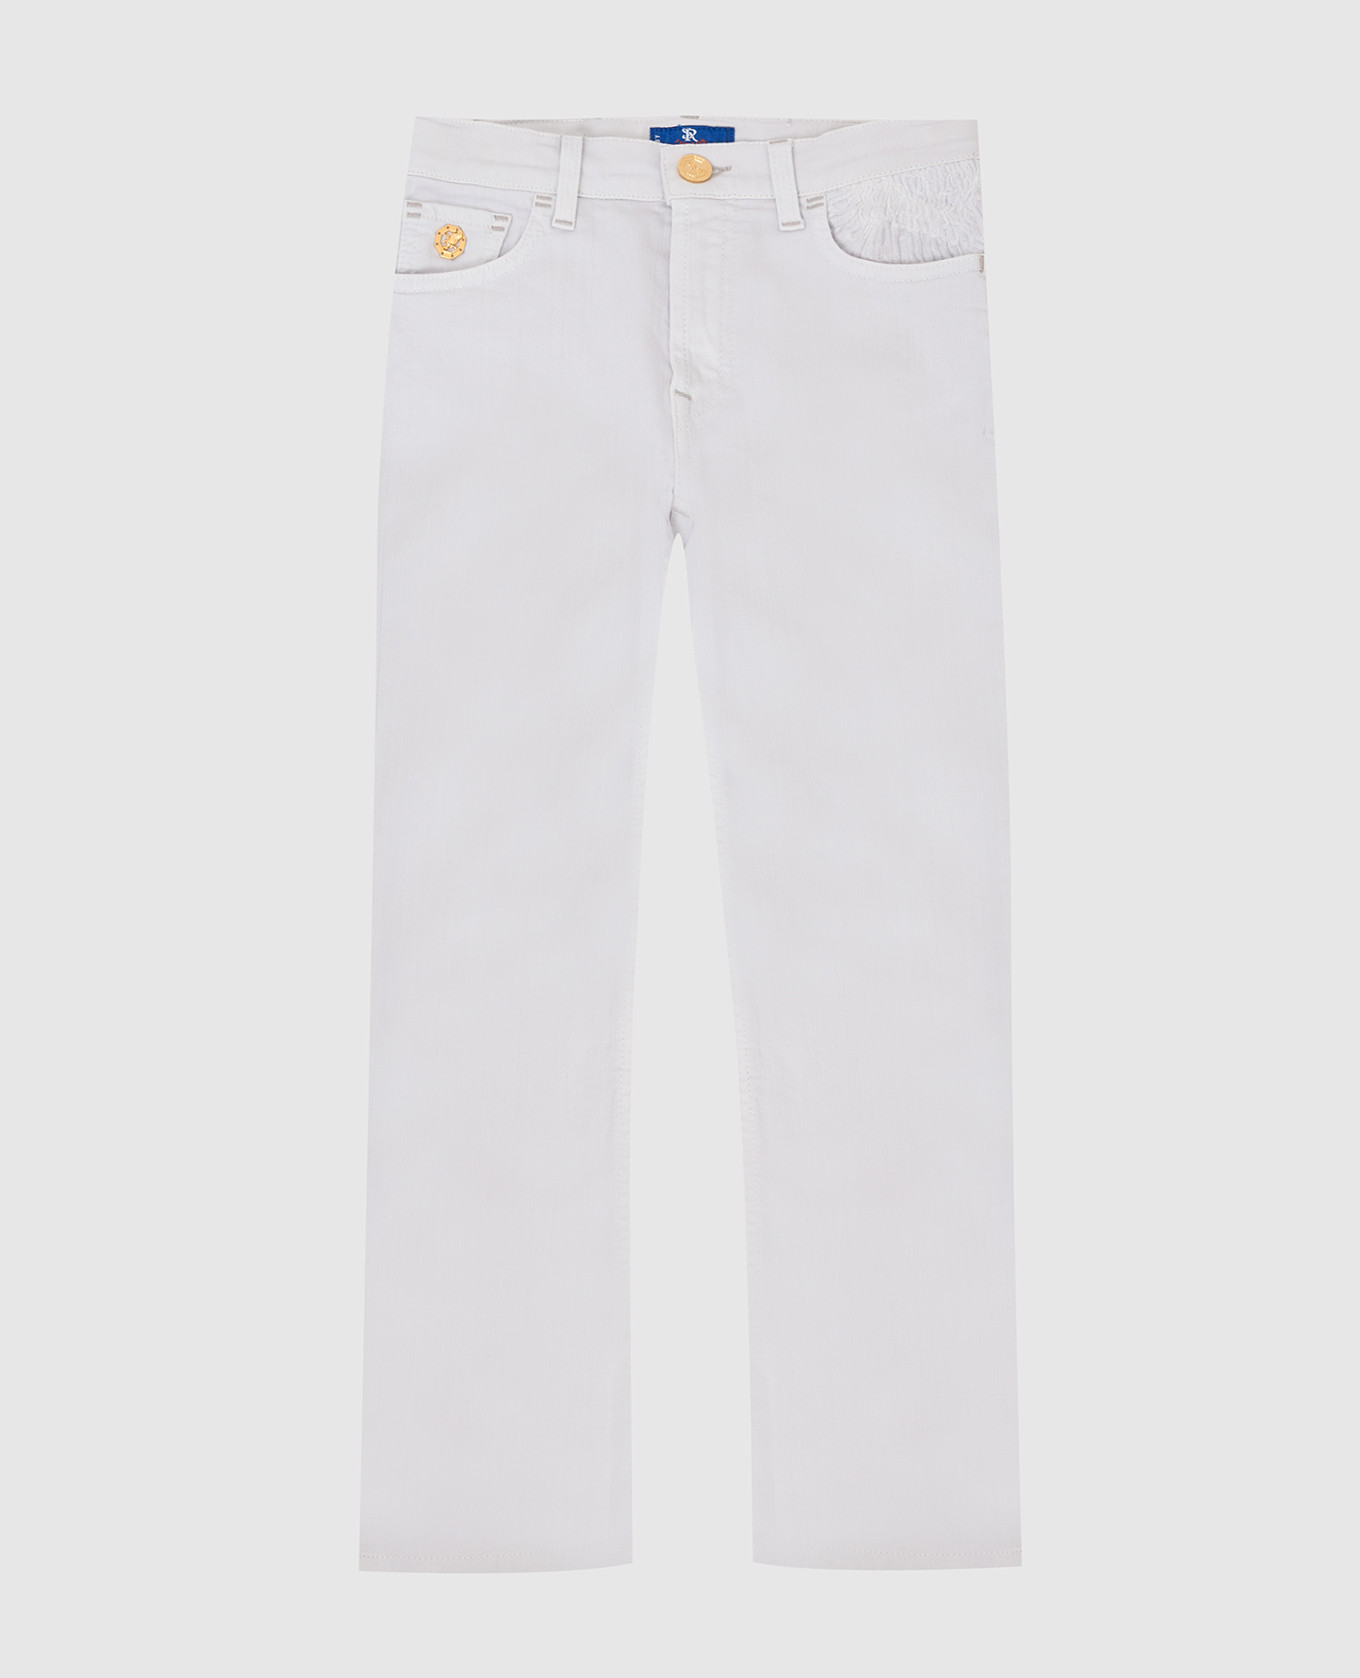 Children's light gray jeans with embroidery